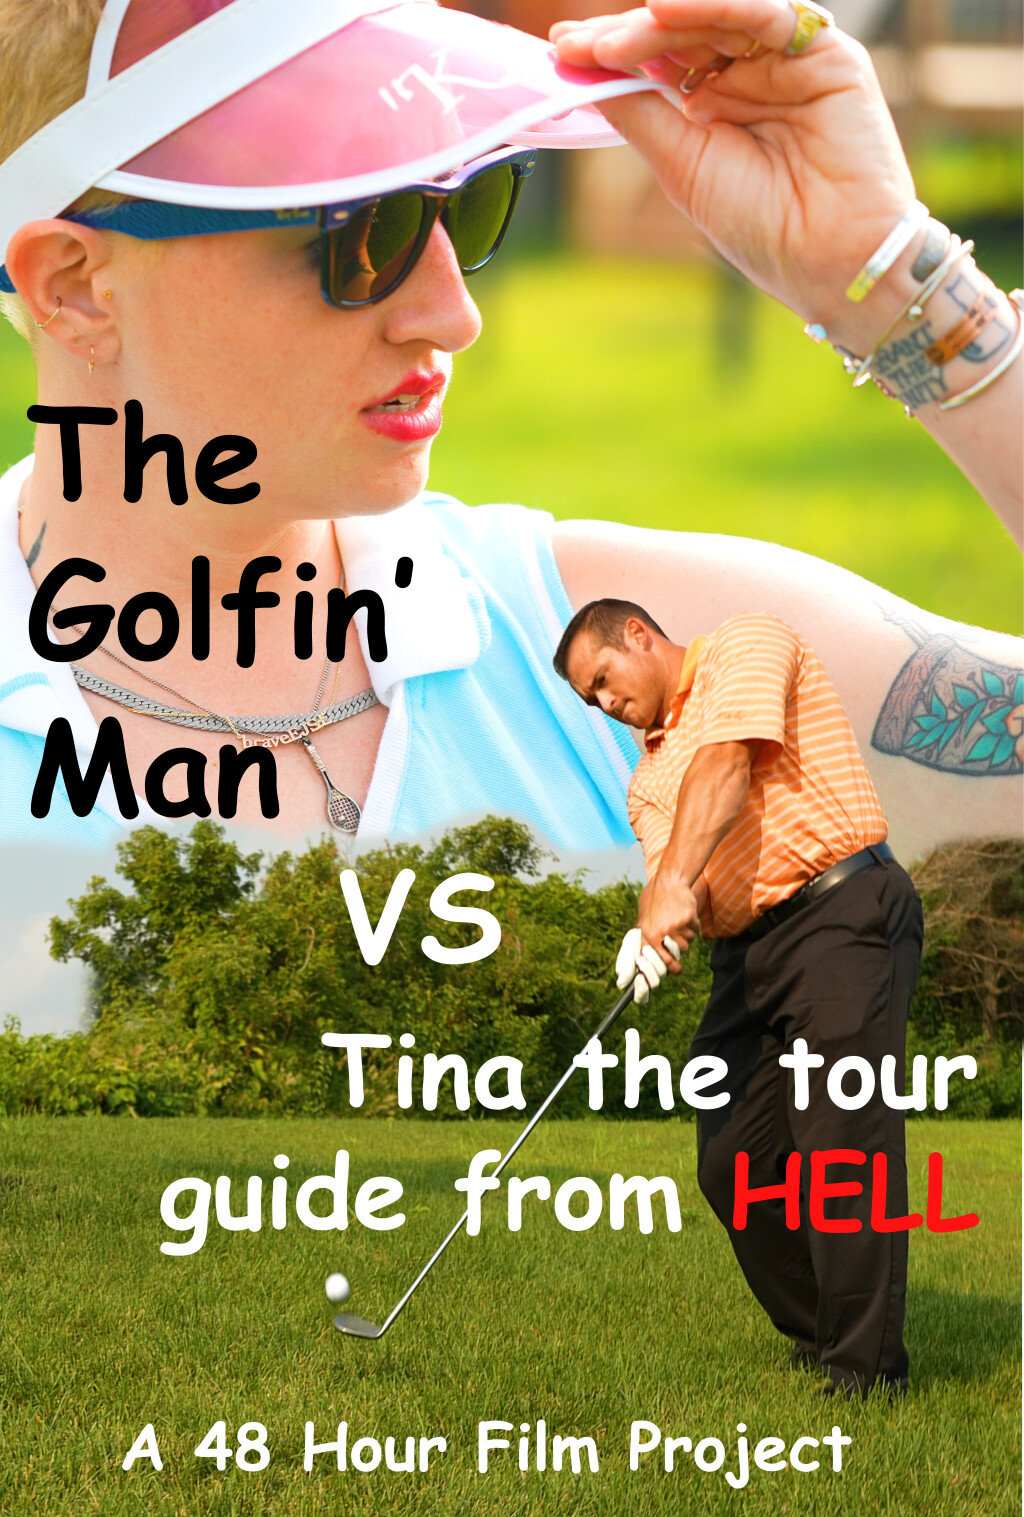 Filmposter for The Golfin' Man vs. Tina the Tour Guide from Hell